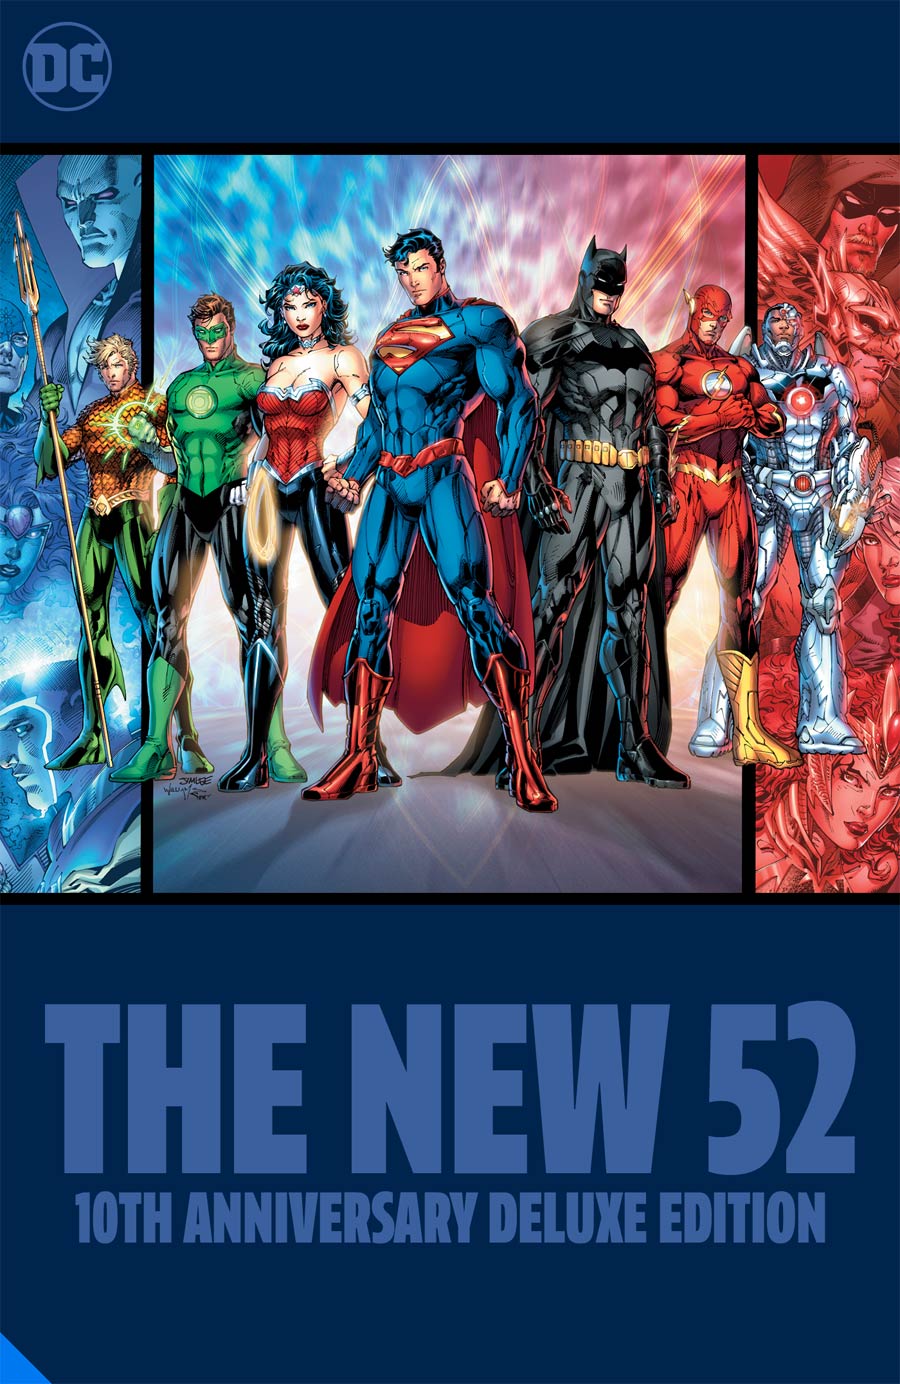 DC Comics The New 52 10th Anniversary Deluxe Edition HC